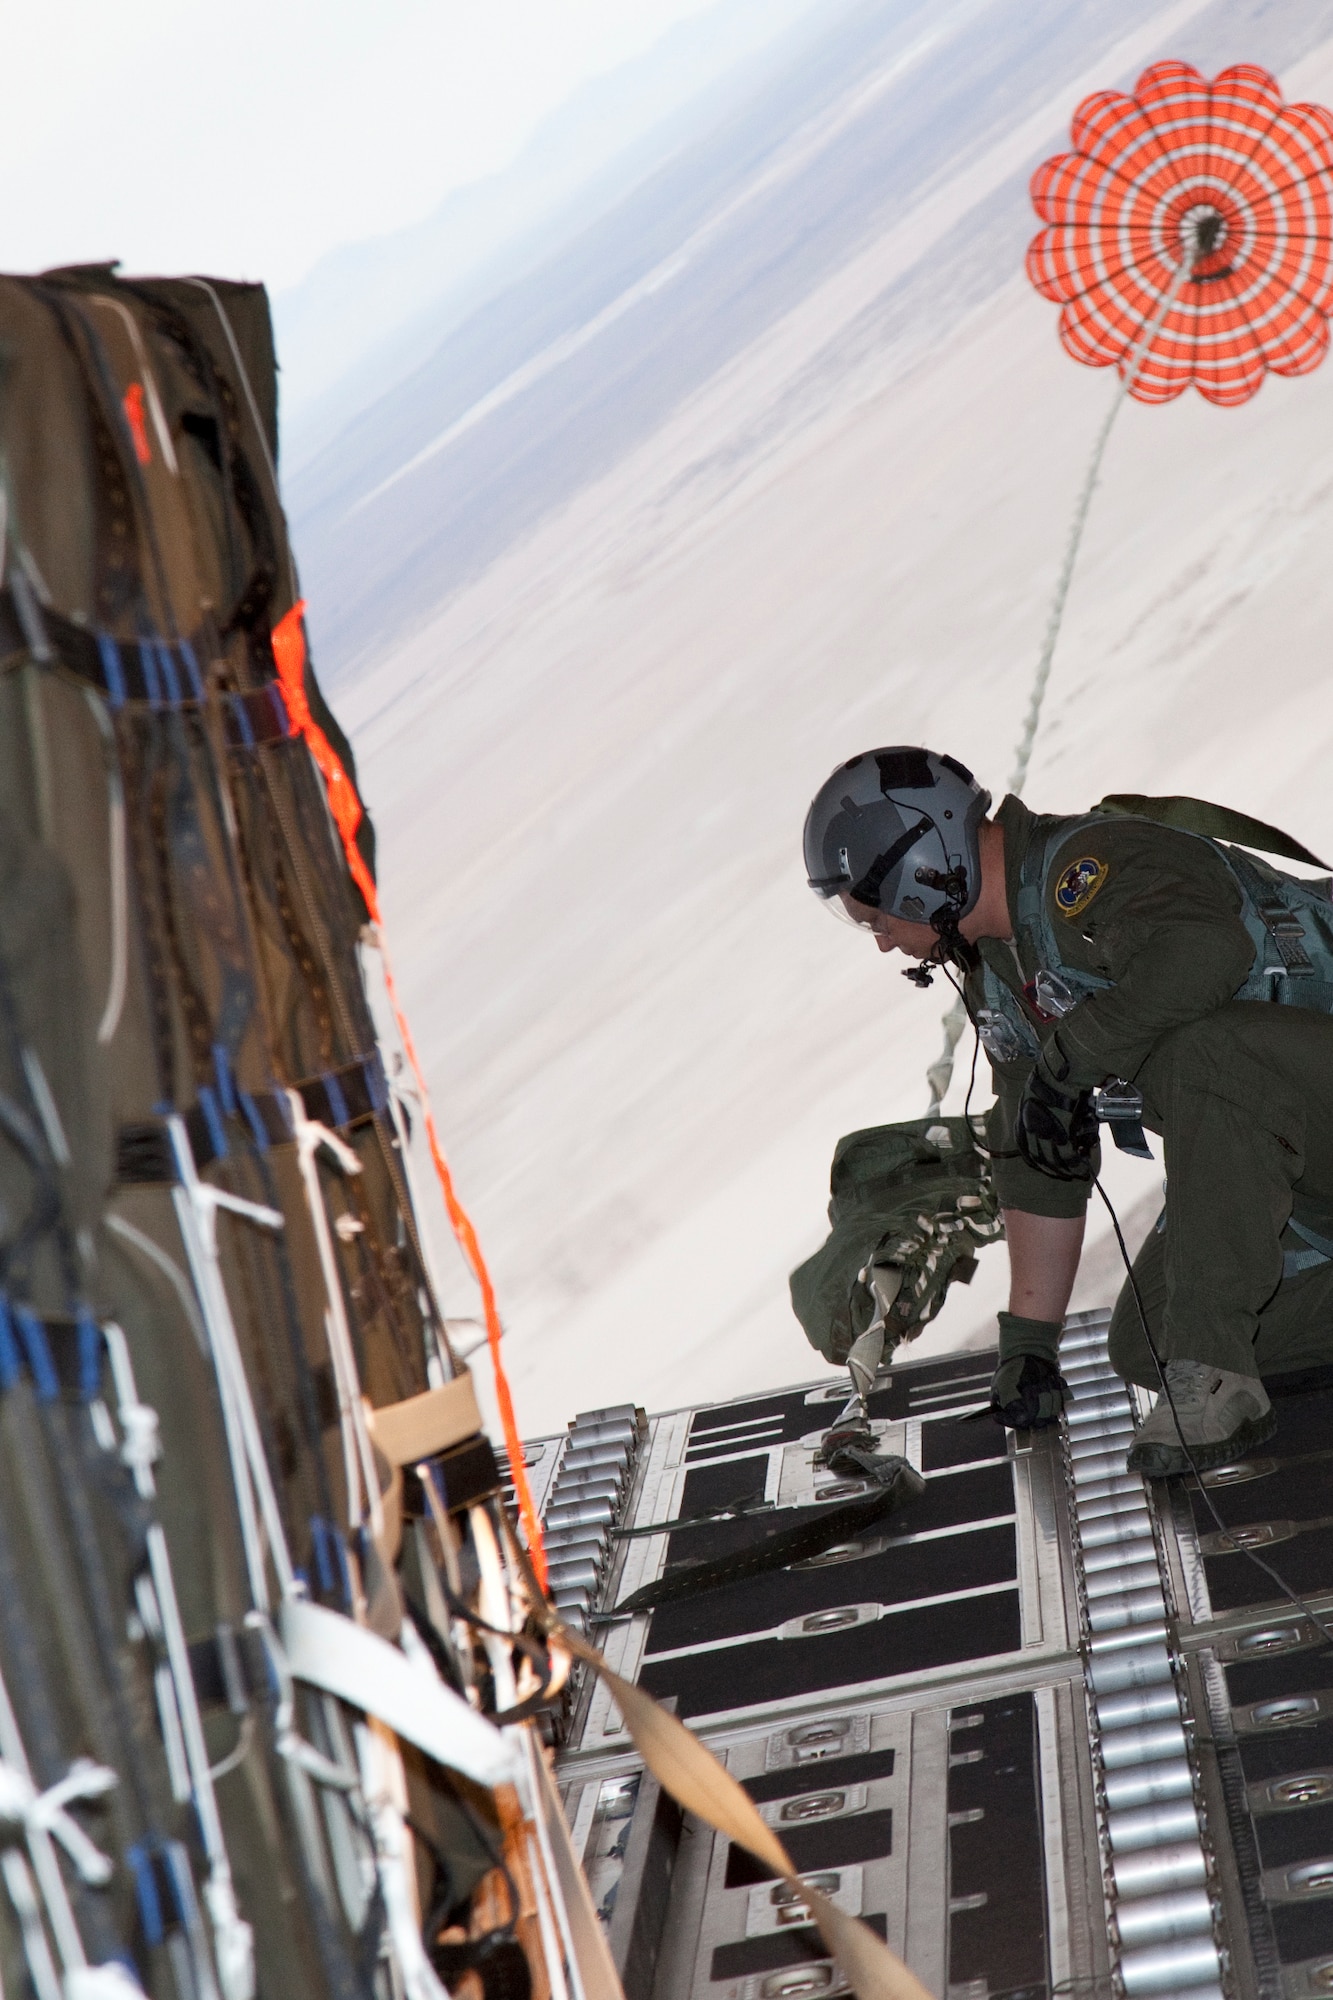 Tech. Sgt. Christopher Jones, 418th Flight Test Squadron C-130J flight test loadmaster, evaluates the cargo area July 13 during a high speed container delivery system test on a C-130J. The 418th FLTS and the C-130 Flight Test Team at Edwards Air Force Base, Calif., is currently testing a new airdrop method called the high speed container delivery system. This new system is designed to deliver supplies to troops on the ground from lower altitudes and higher airspeeds from a C-130J. (U.S. Air Force photo by Chris Neill)